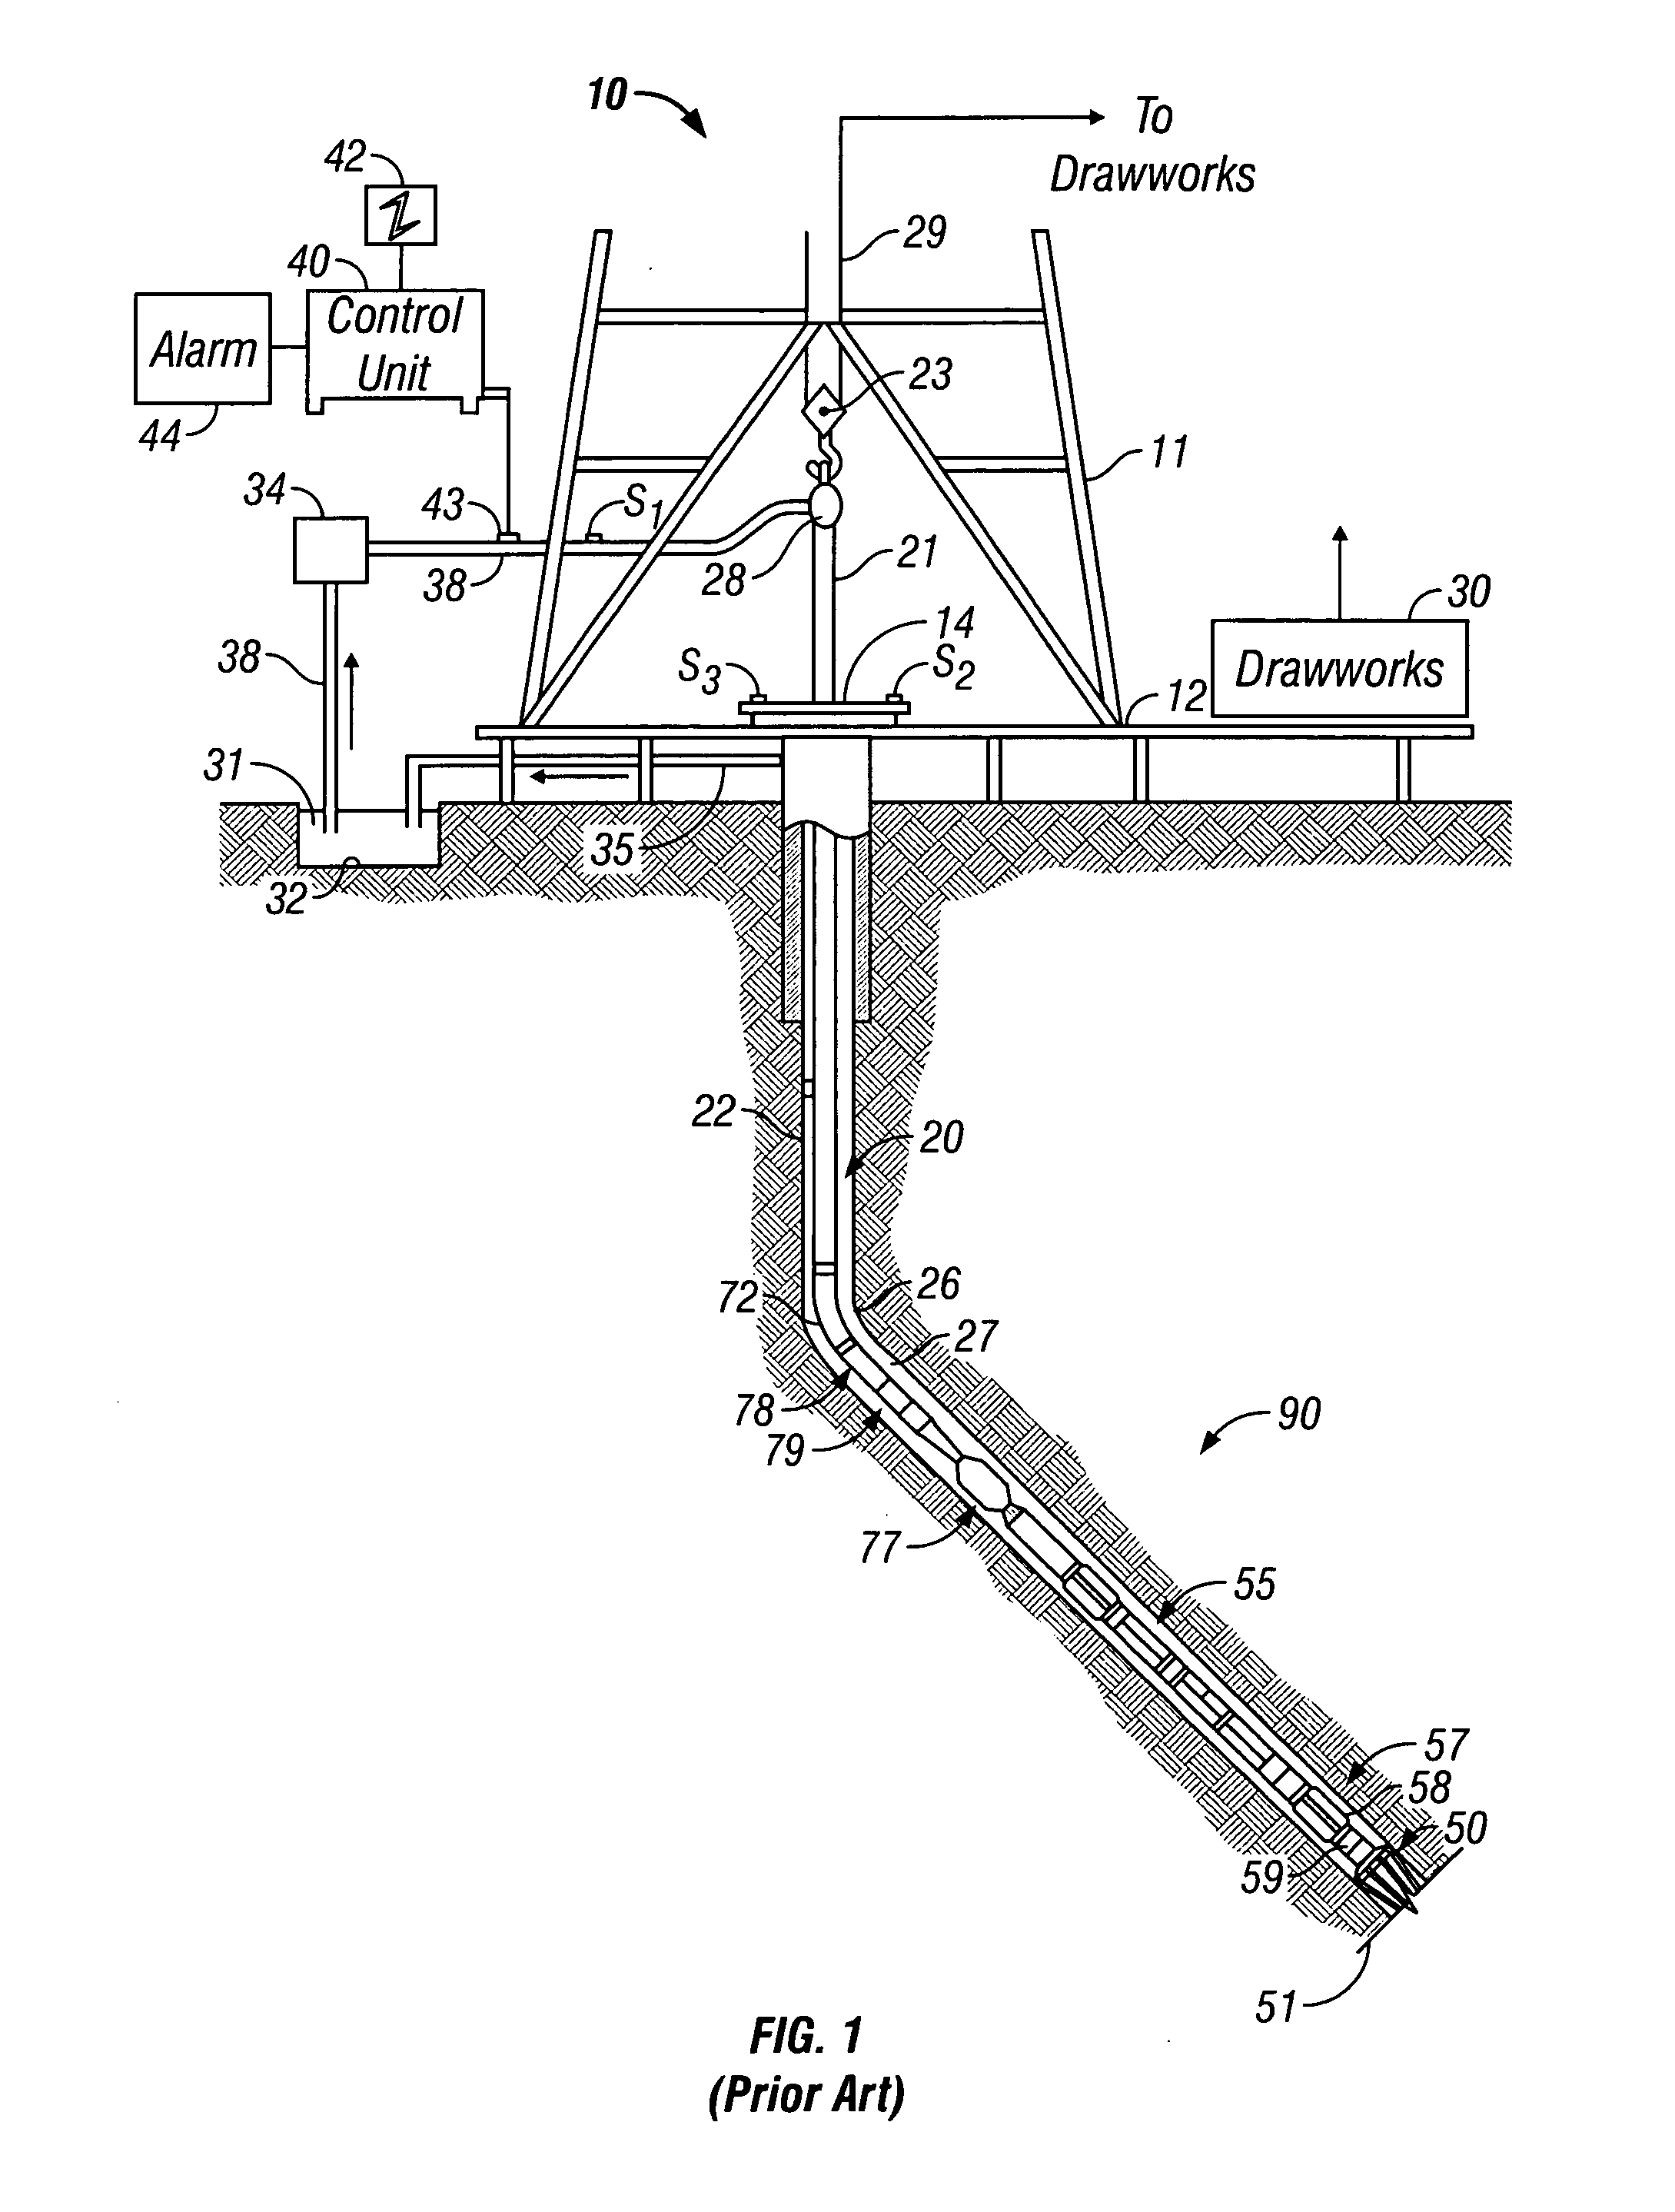 Method for measuring transient electromagnetic components to perform deep geosteering while drilling